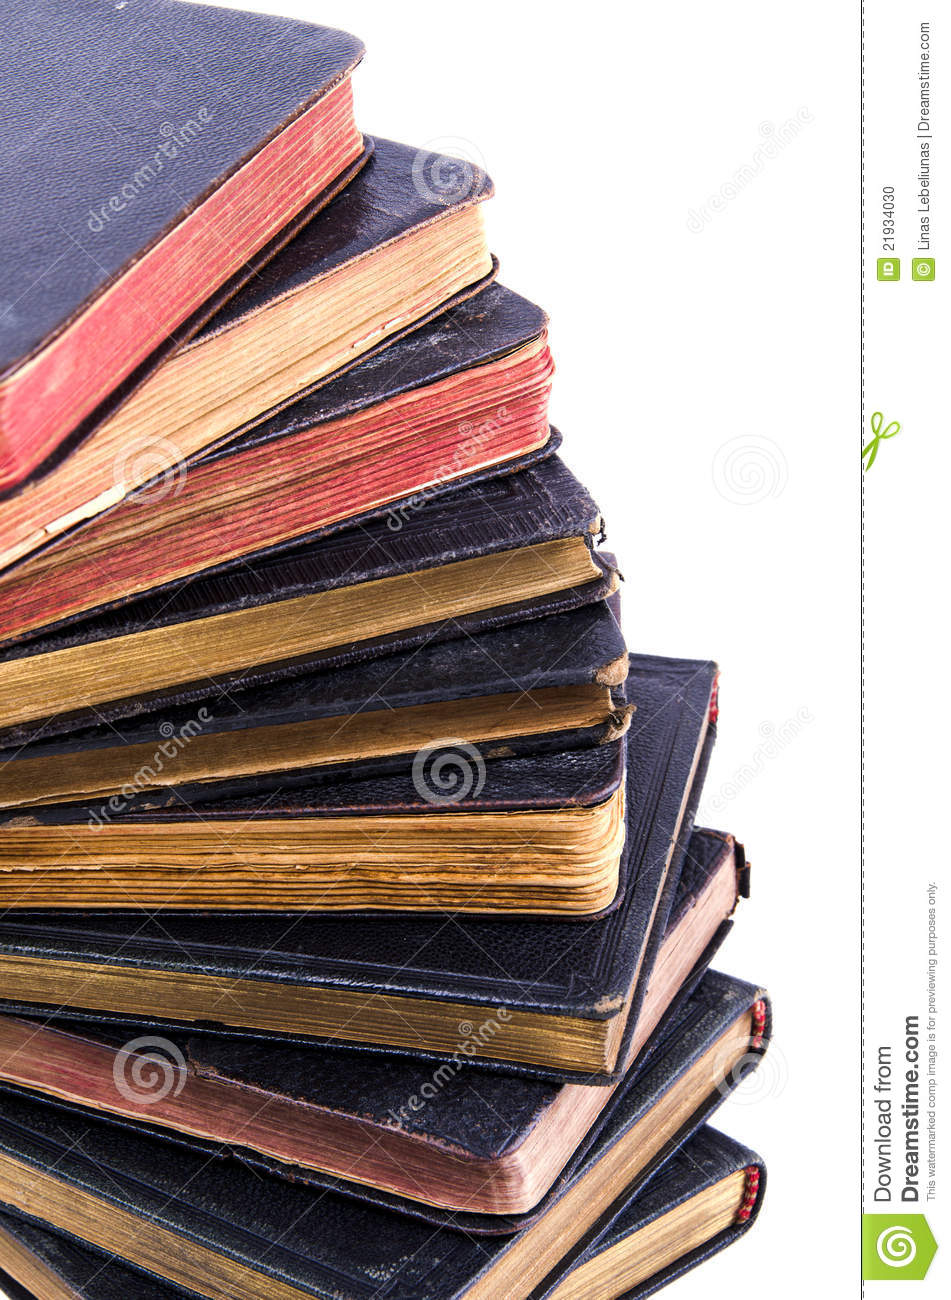 Book Stairs Stock Photo   Image  21934030